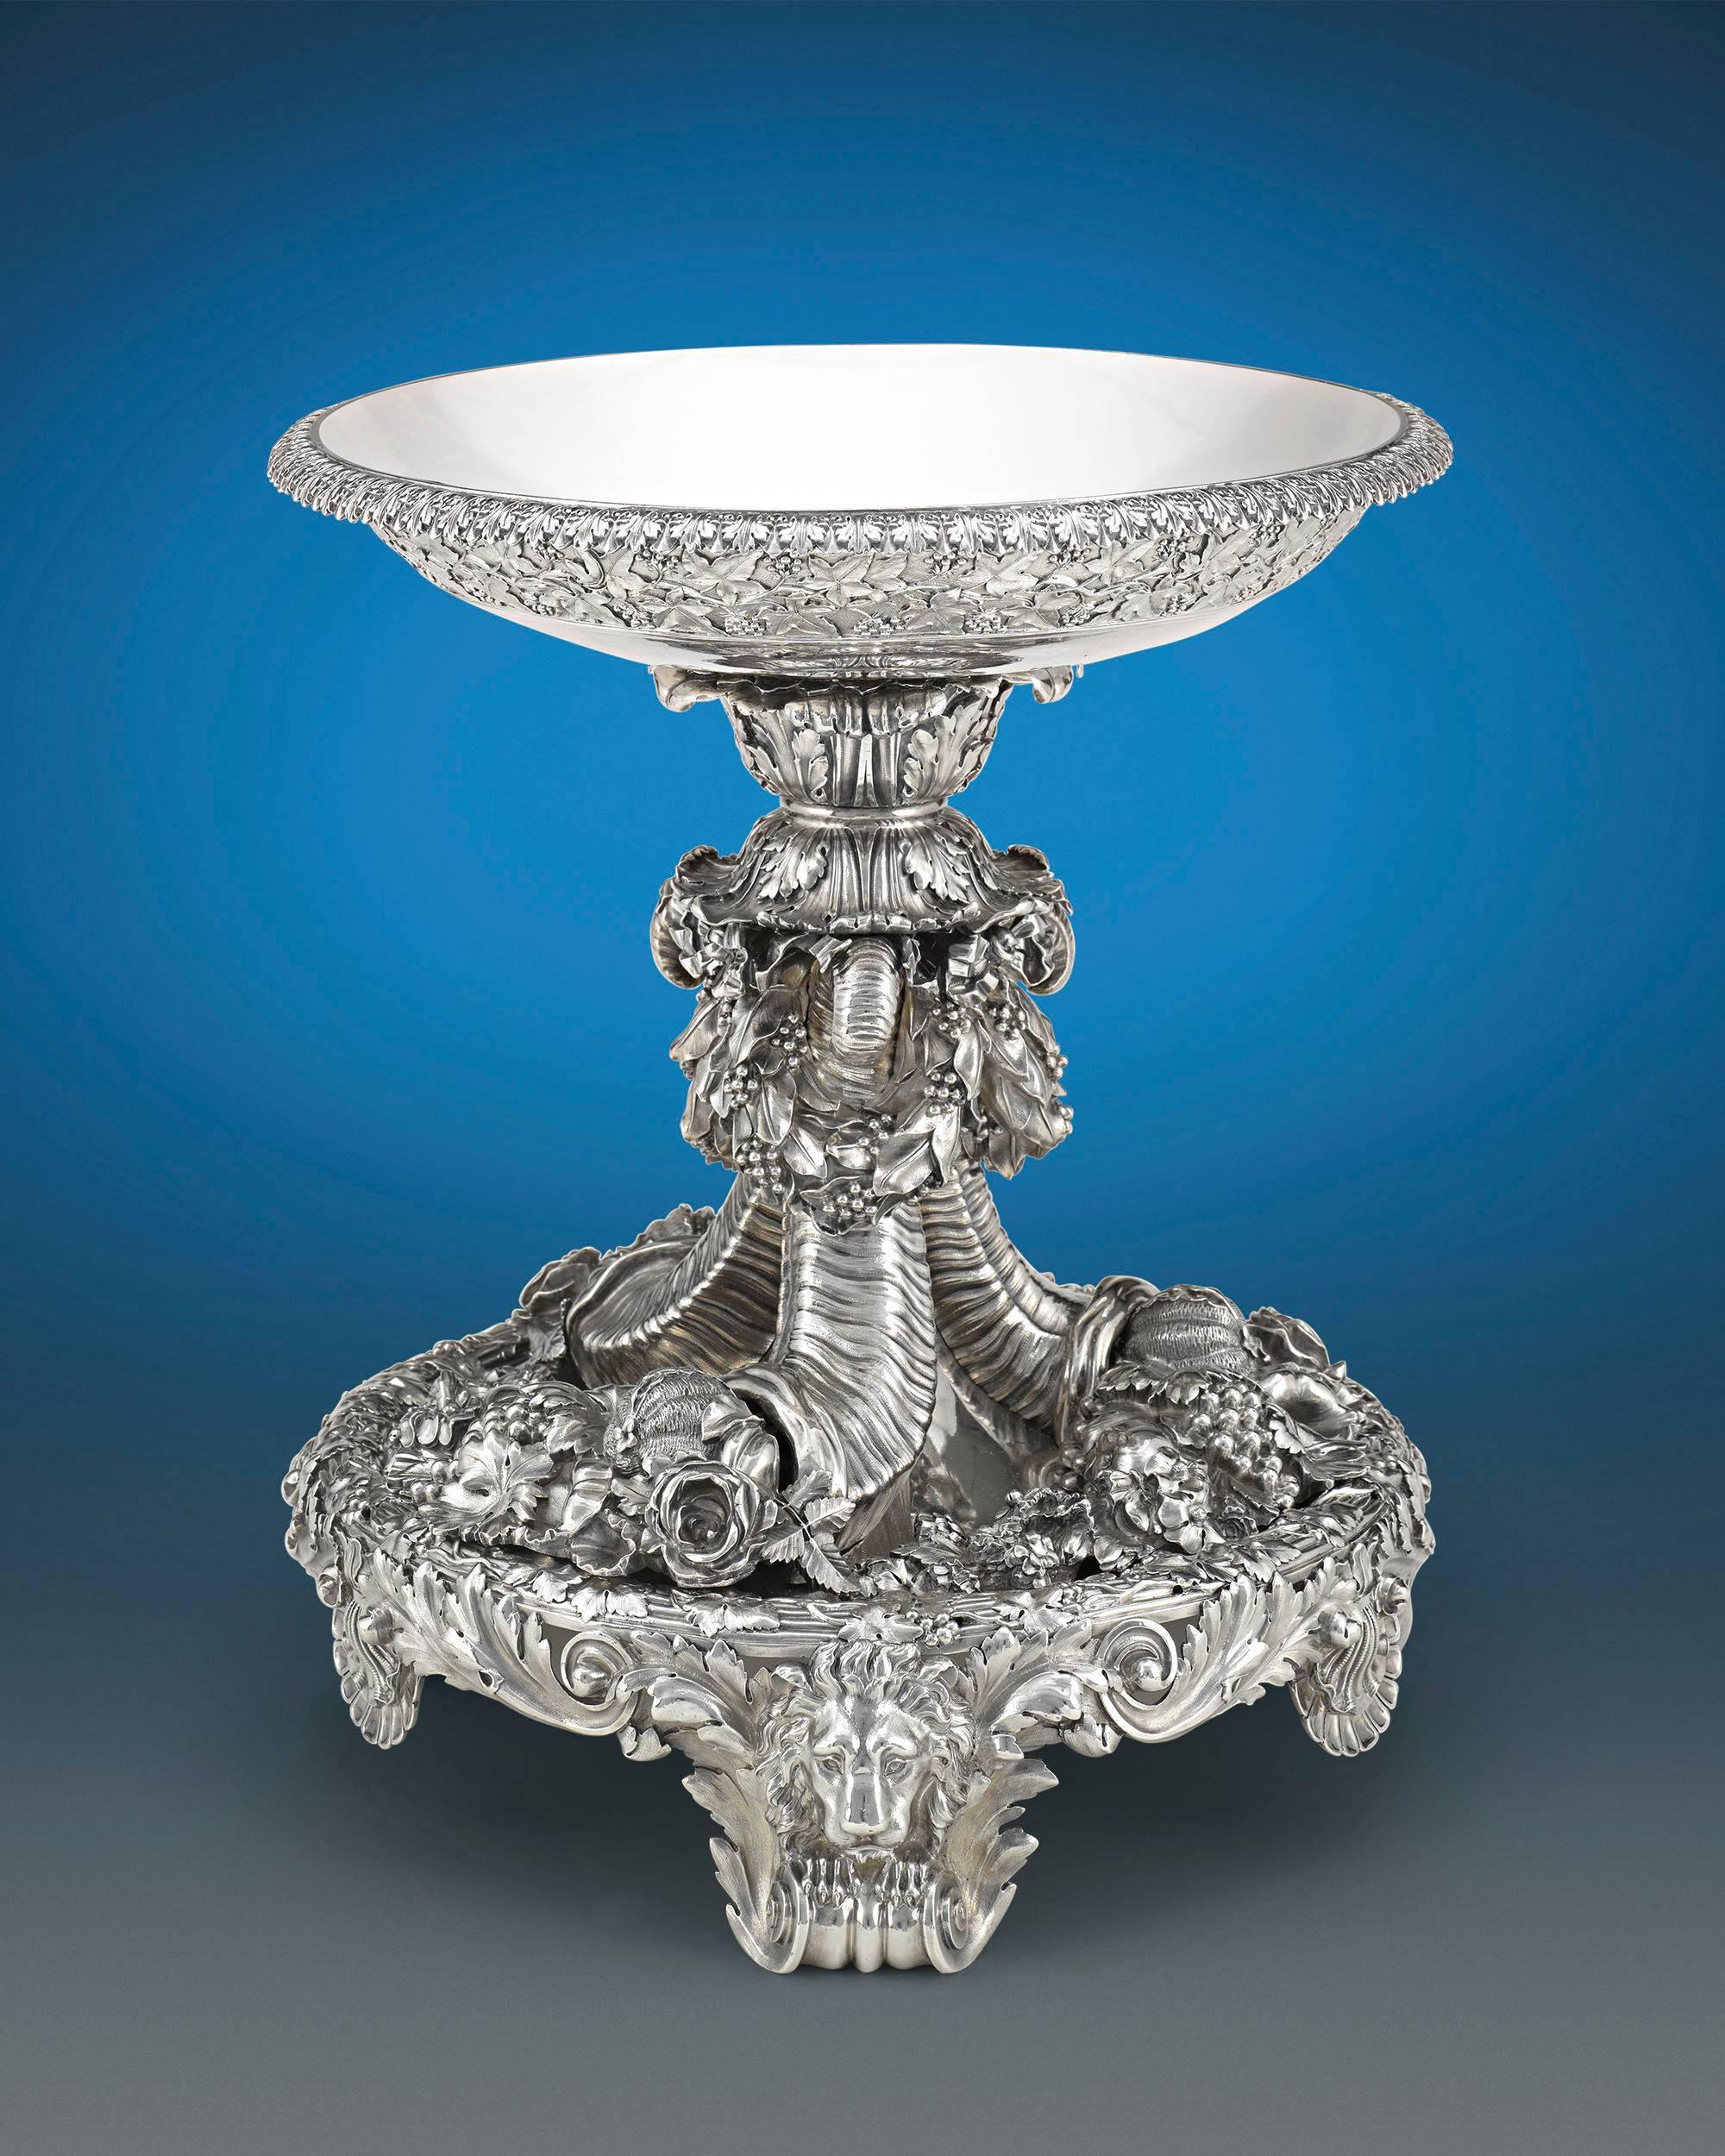 English Silver Centerpiece by Paul Storr